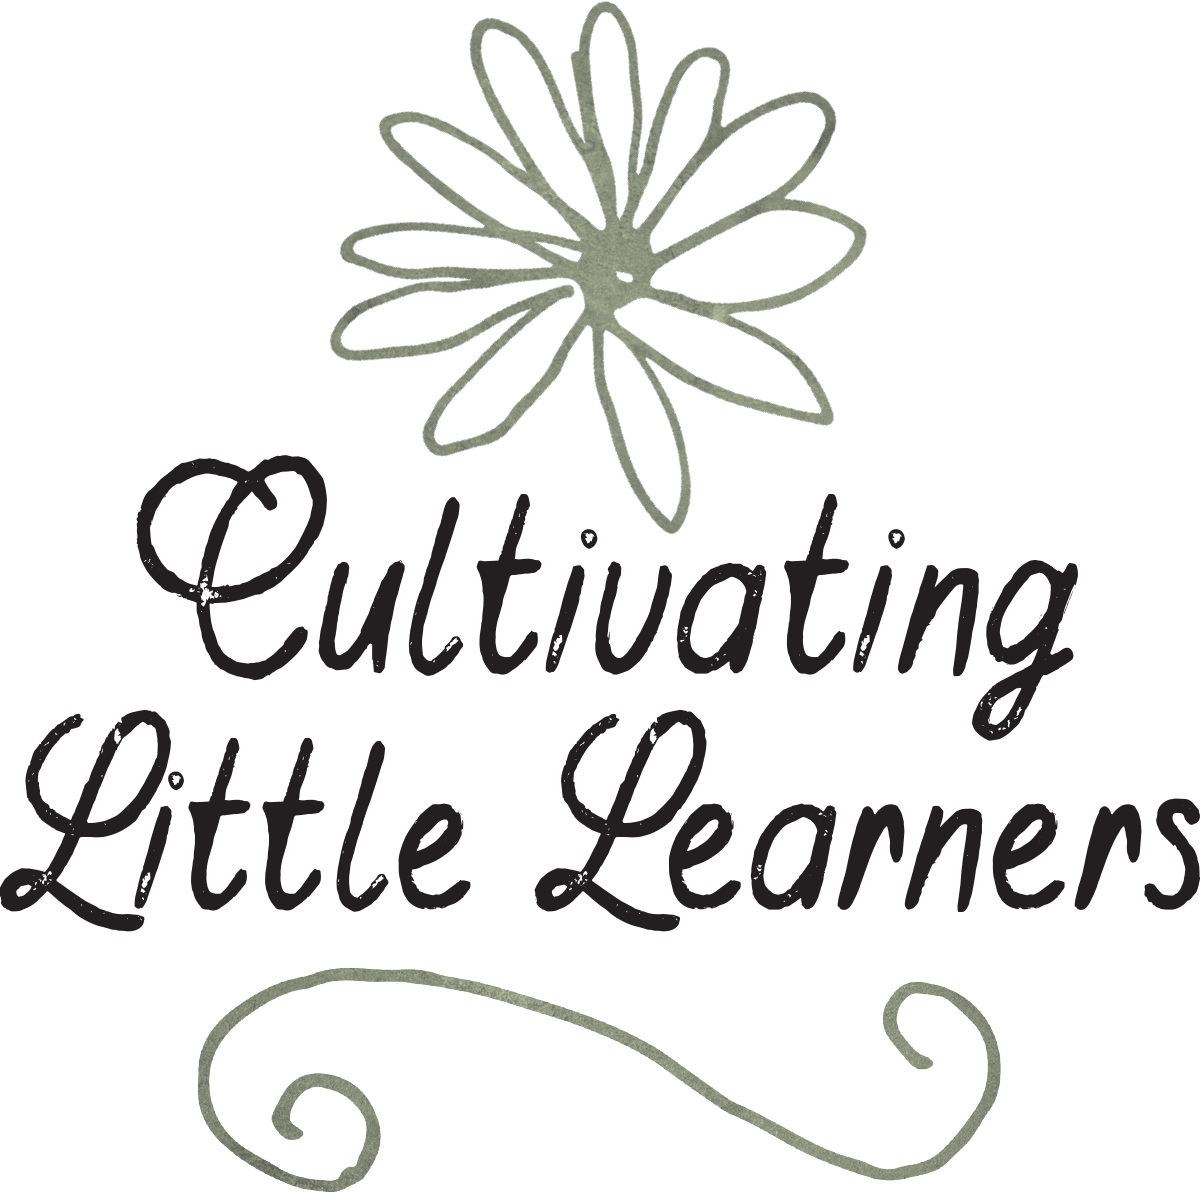 Cultivating Little Learners